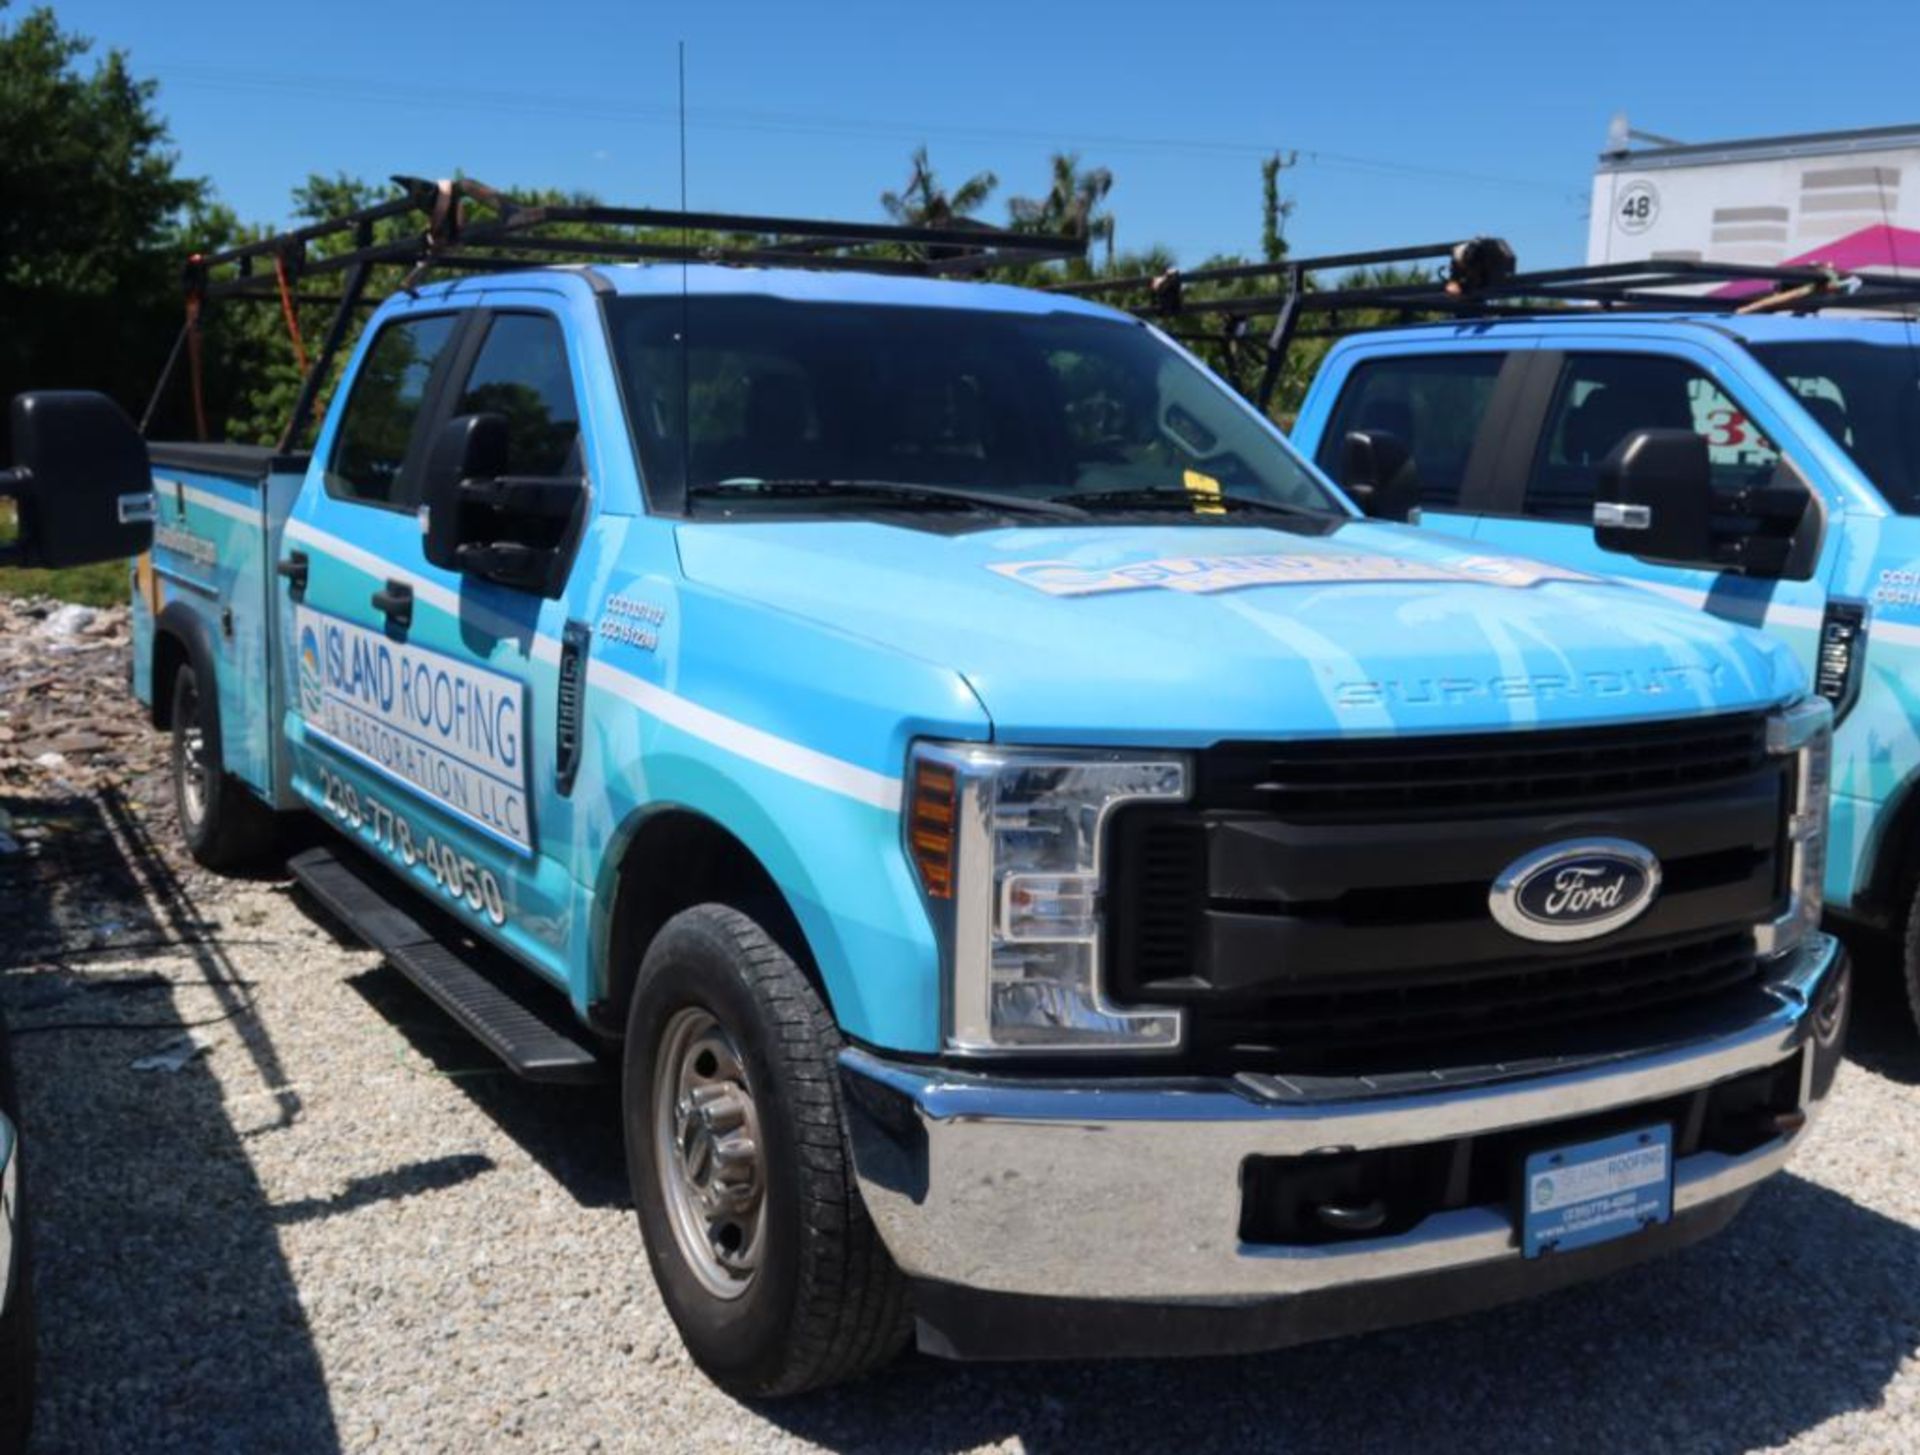 2019 Ford F-250 4 Door Utility Bed w/Ladder Rack,Gas, License# LYI-K64, VIN 1FD7W2A66KED56627, Unit# - Image 2 of 8